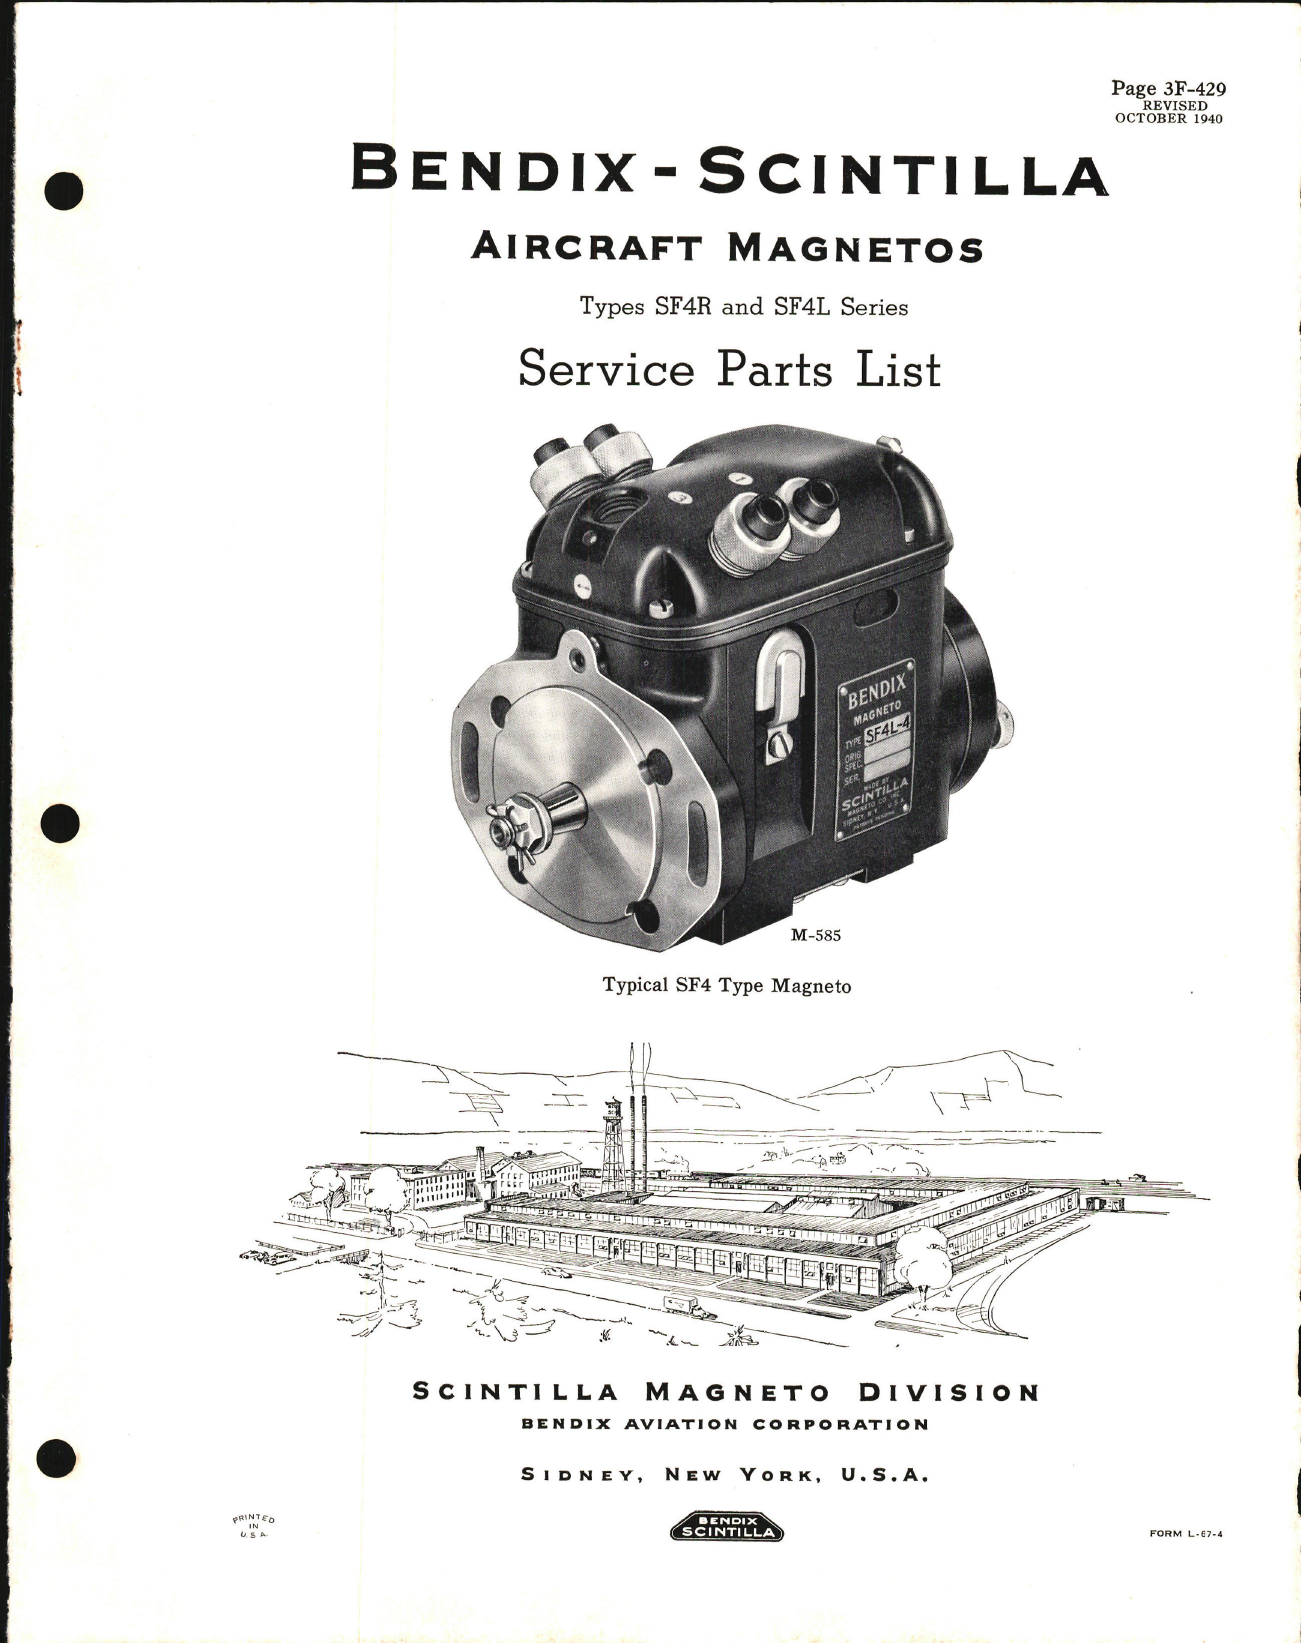 Sample page 1 from AirCorps Library document: Service Parts List for Bendix-Scintilla Magnetos Types SF4R and SF4L